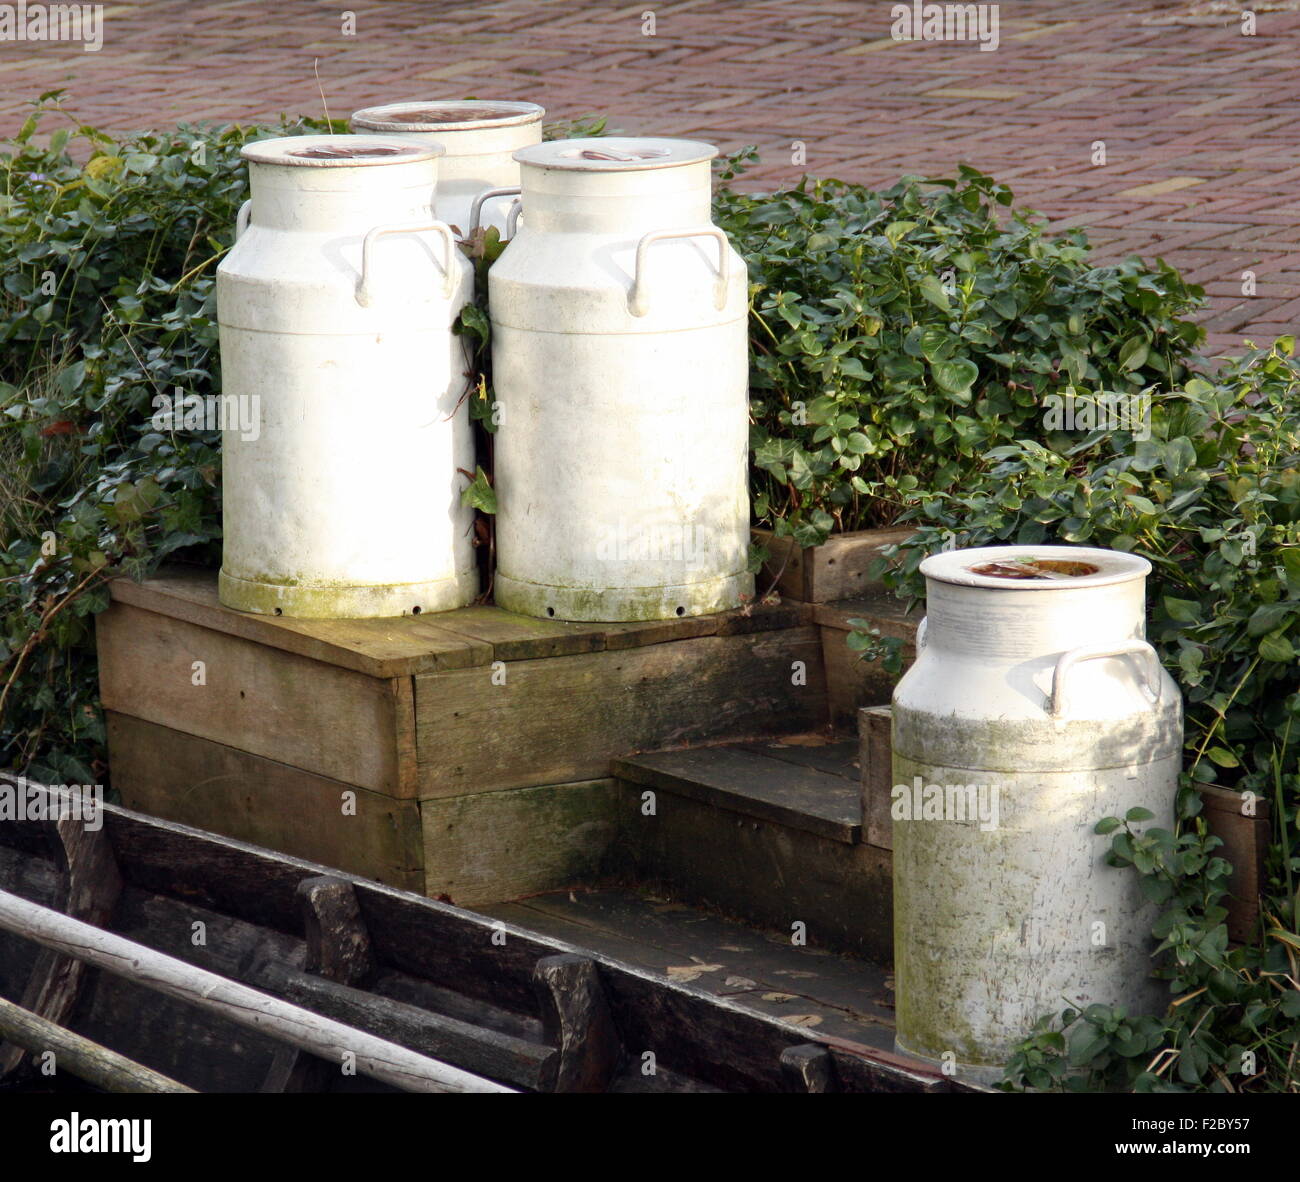 Milk cans ready for transport Stock Photo